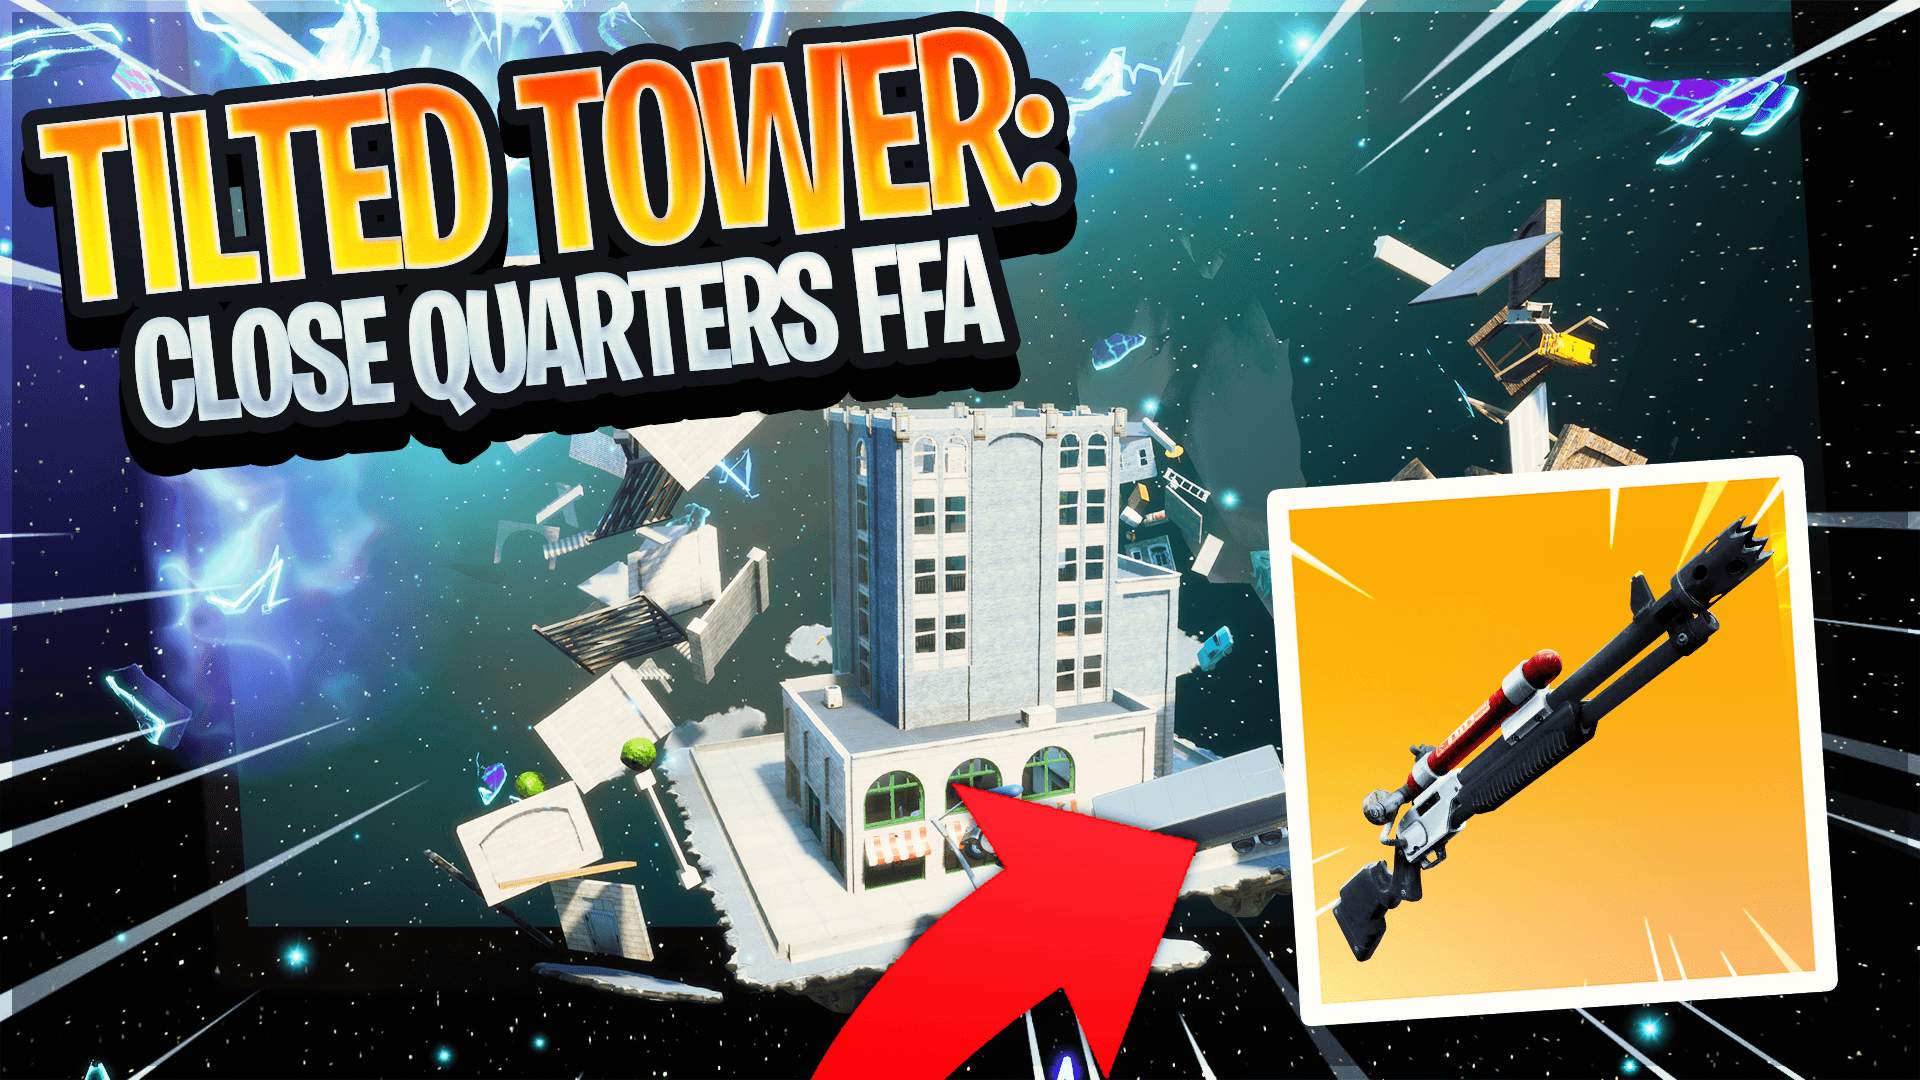 TILTED TOWER: CLOSE QUARTERS FFA